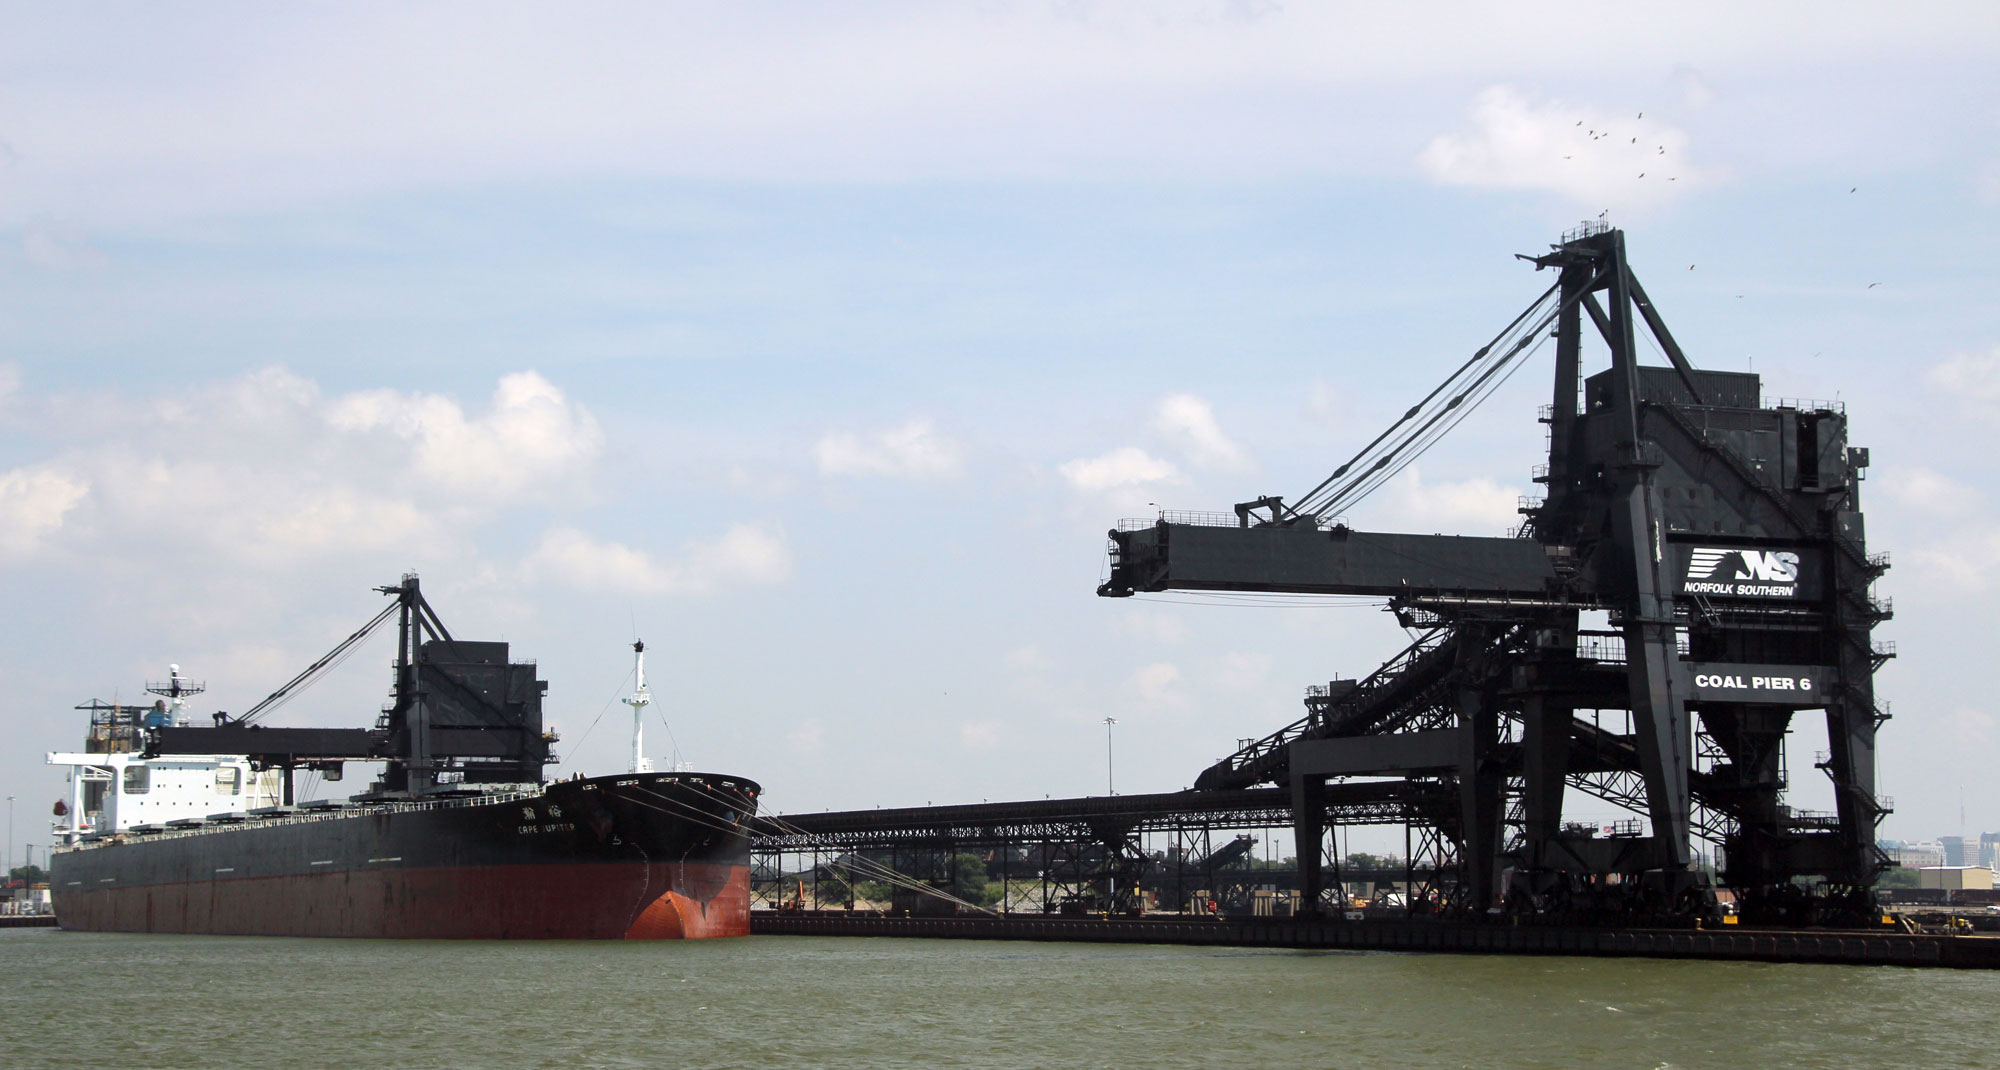 Photograph of a ship docked at Coal Pier 6 of the Lamberts Point Coal Terminal in Virginia.